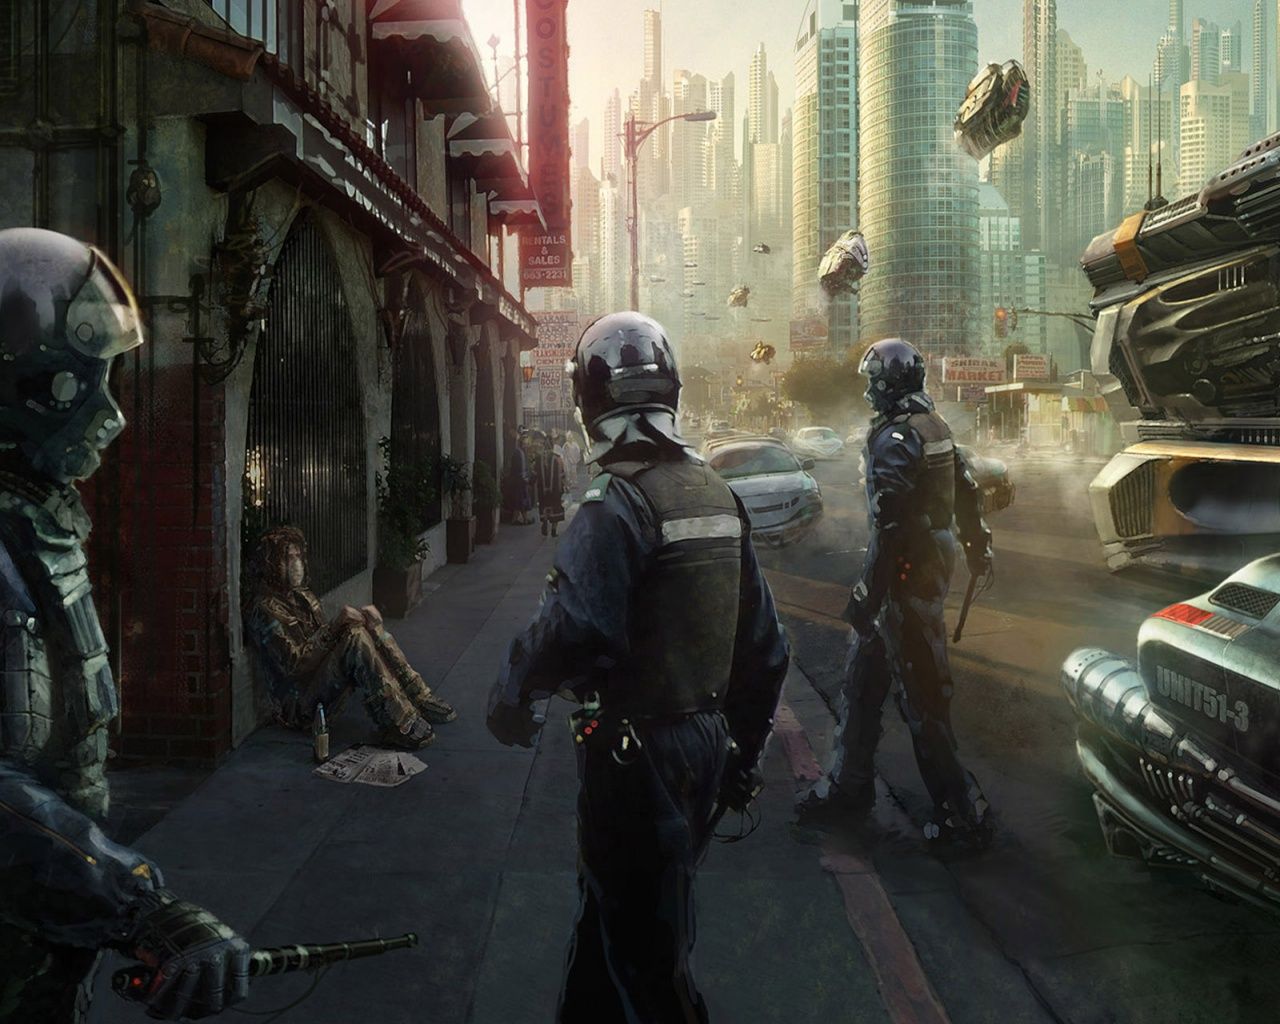 Future police officers desktop PC and Mac wallpaper